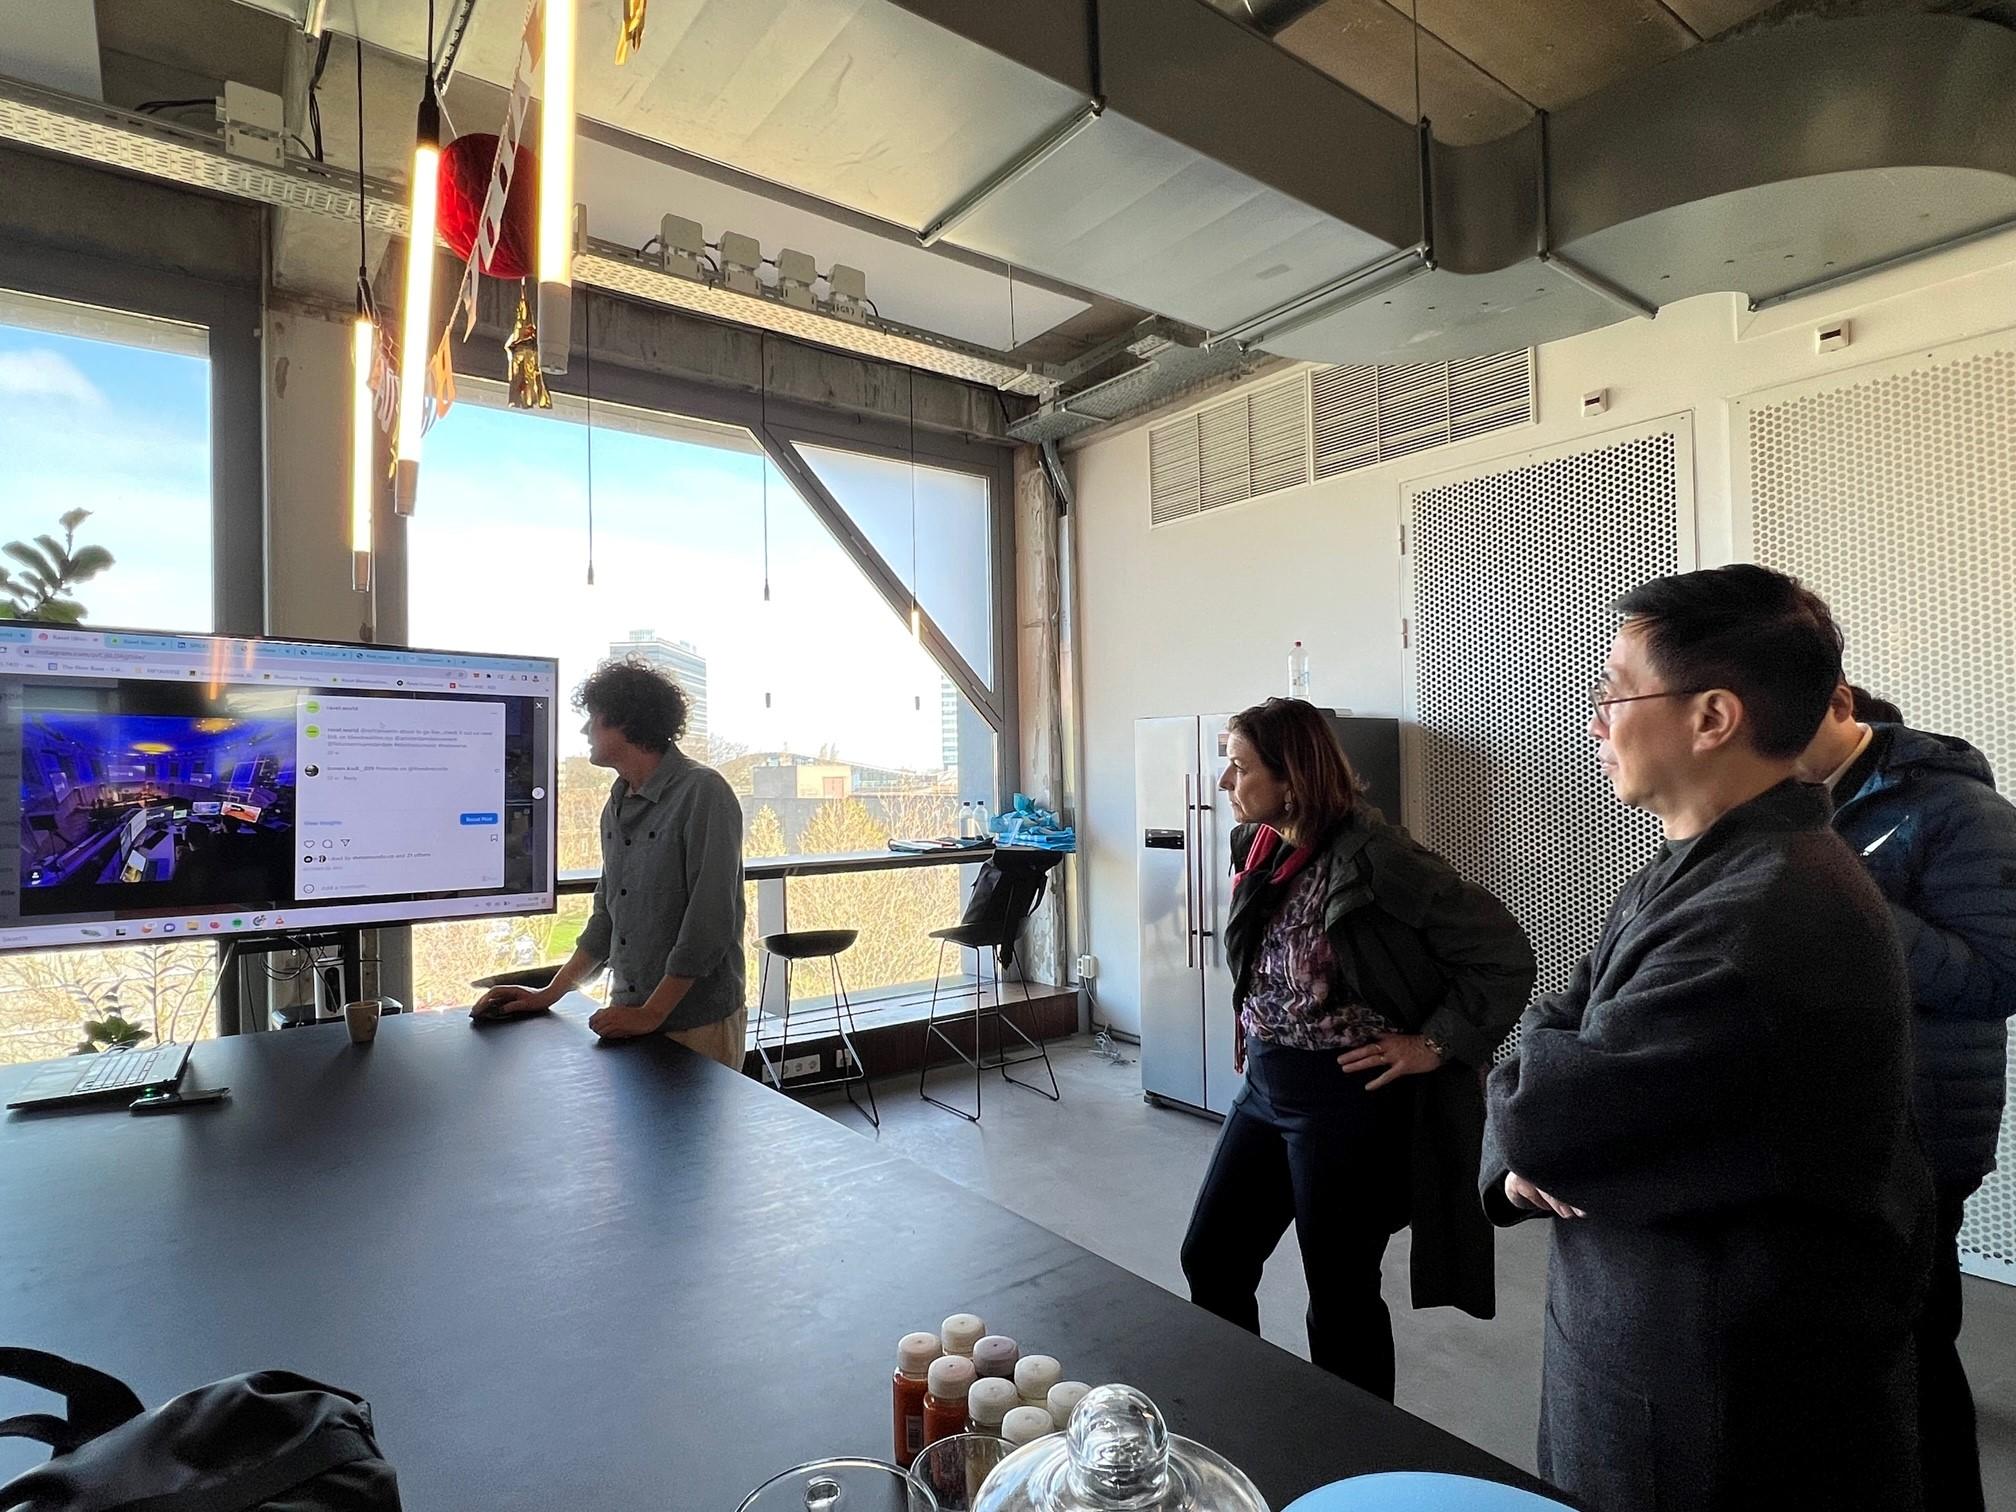 The Secretary for Culture, Sports and Tourism, Mr Kevin Yeung (first right), today (March 30, Amsterdam time) visited the Marineterrein Amsterdam, a testing area with space for open innovation, and attended a briefing held by a member of the testing area.